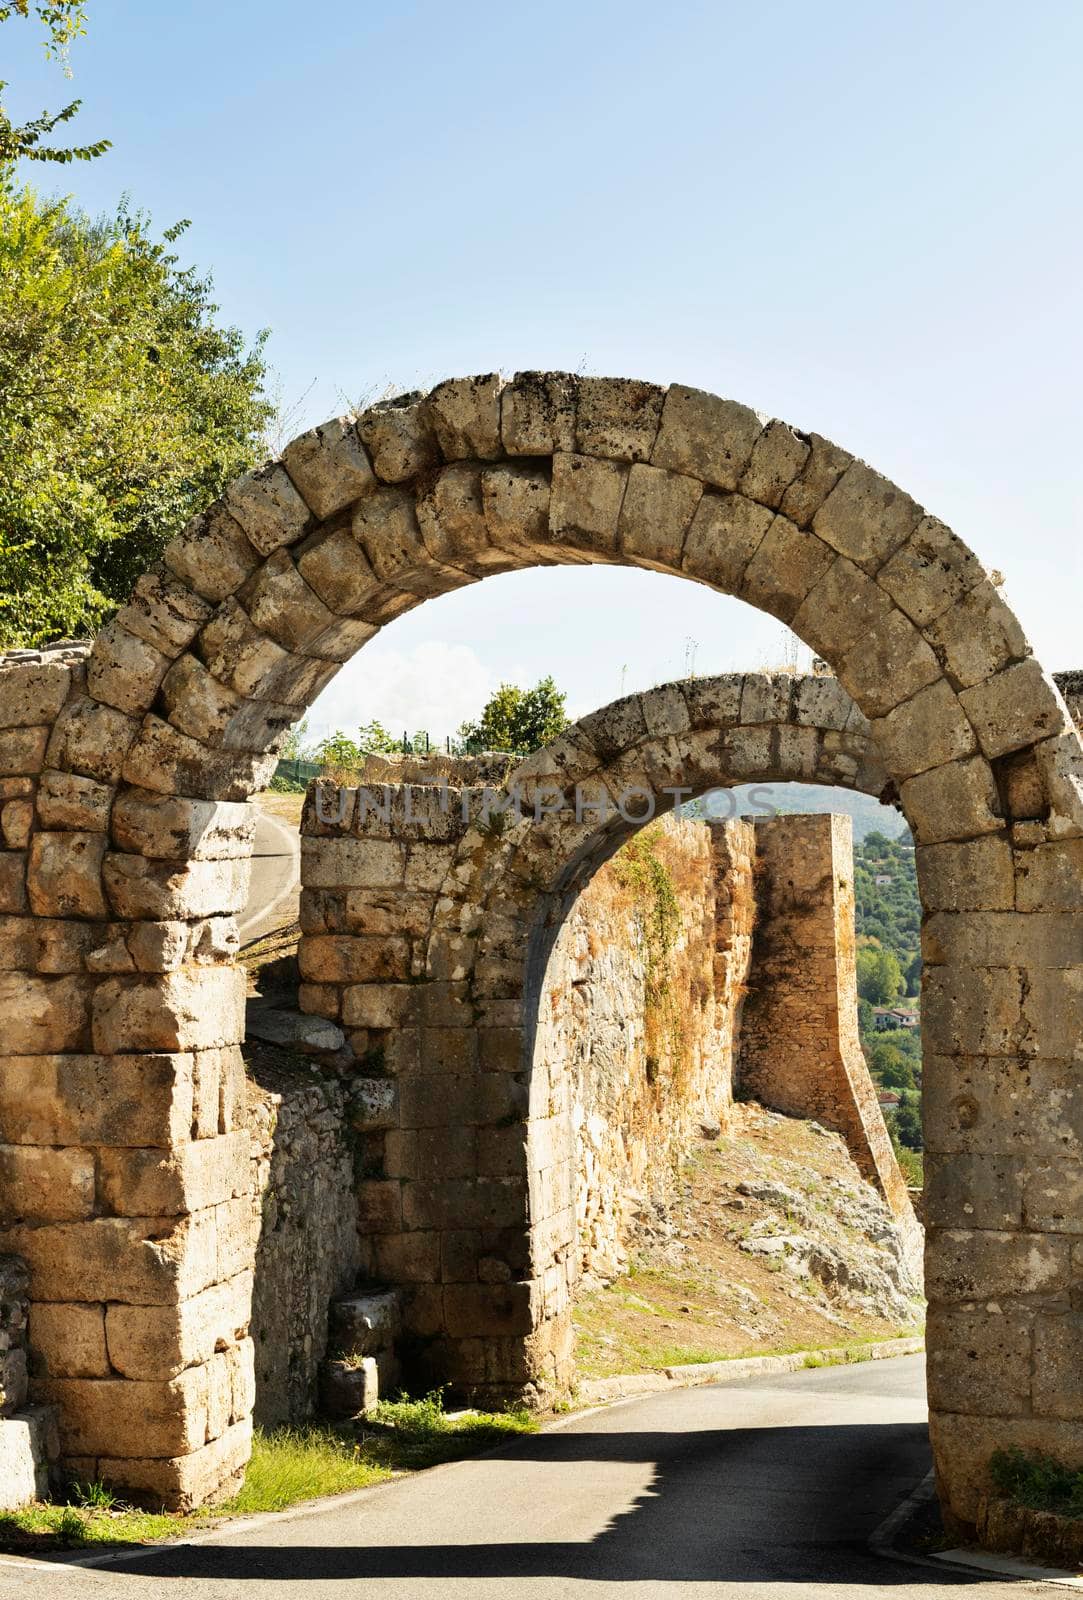 Ancient town of Ferentino , Italy , Porta Casamari , double gate with two round arches constructed of blocks of tuff